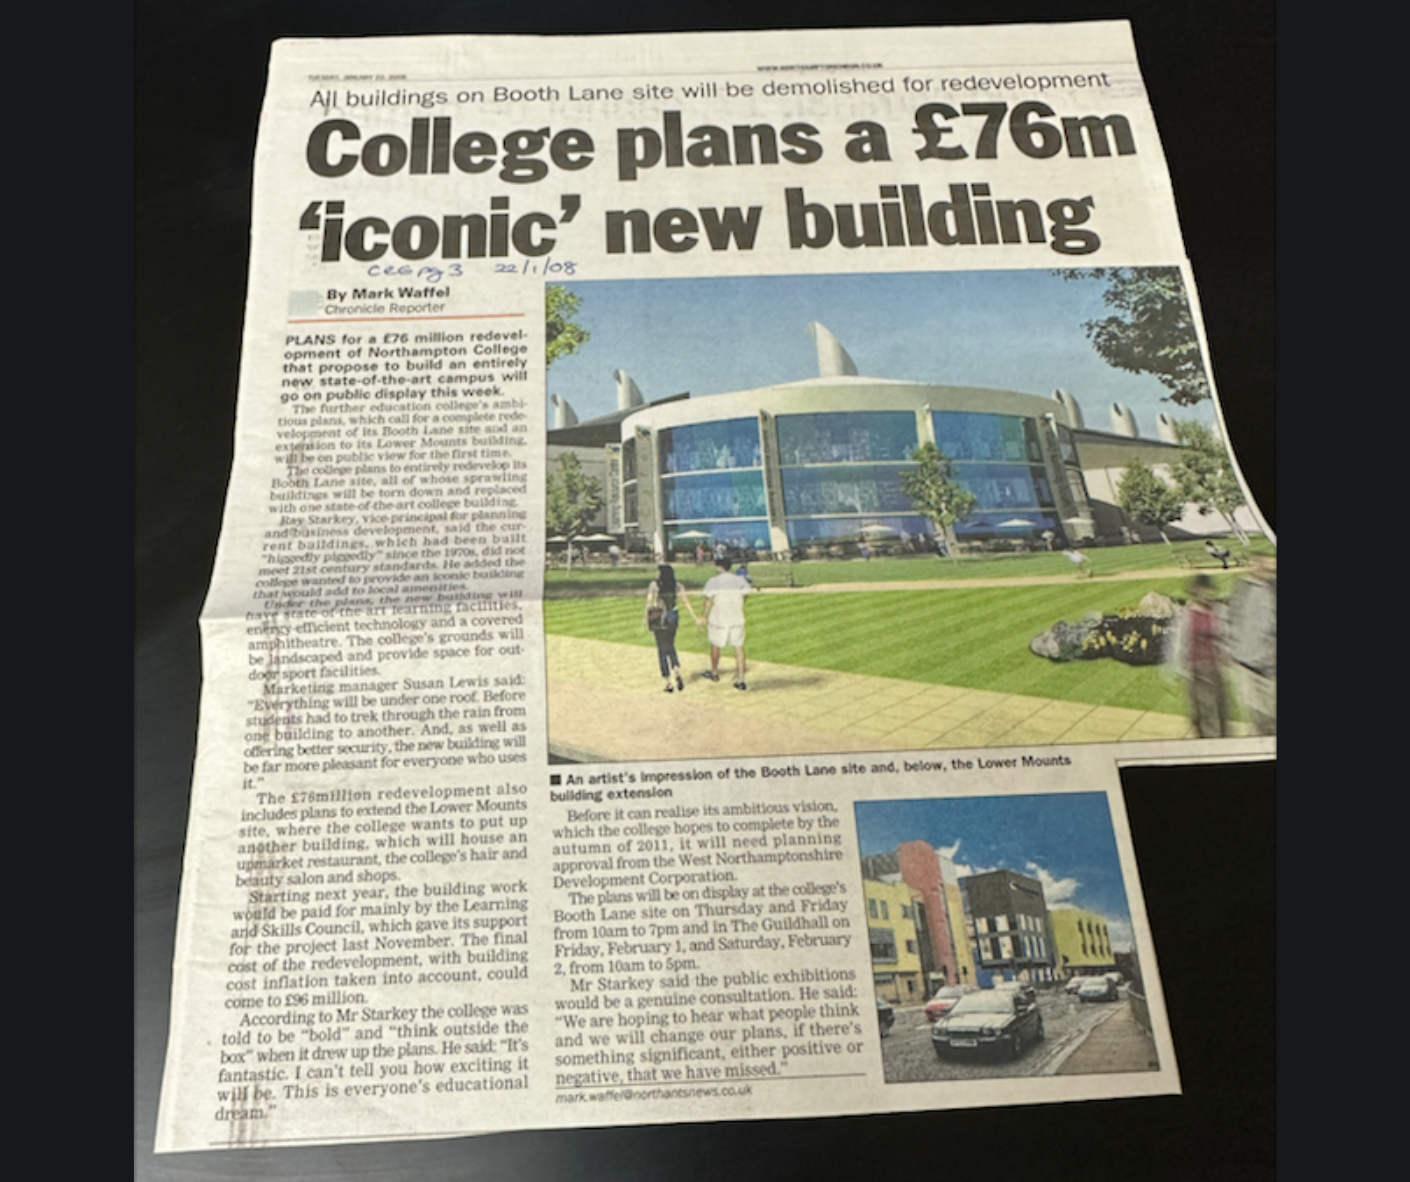 Coverage of our Booth Lane campus redevelopment in 2008, from the Chronicle and Echo.